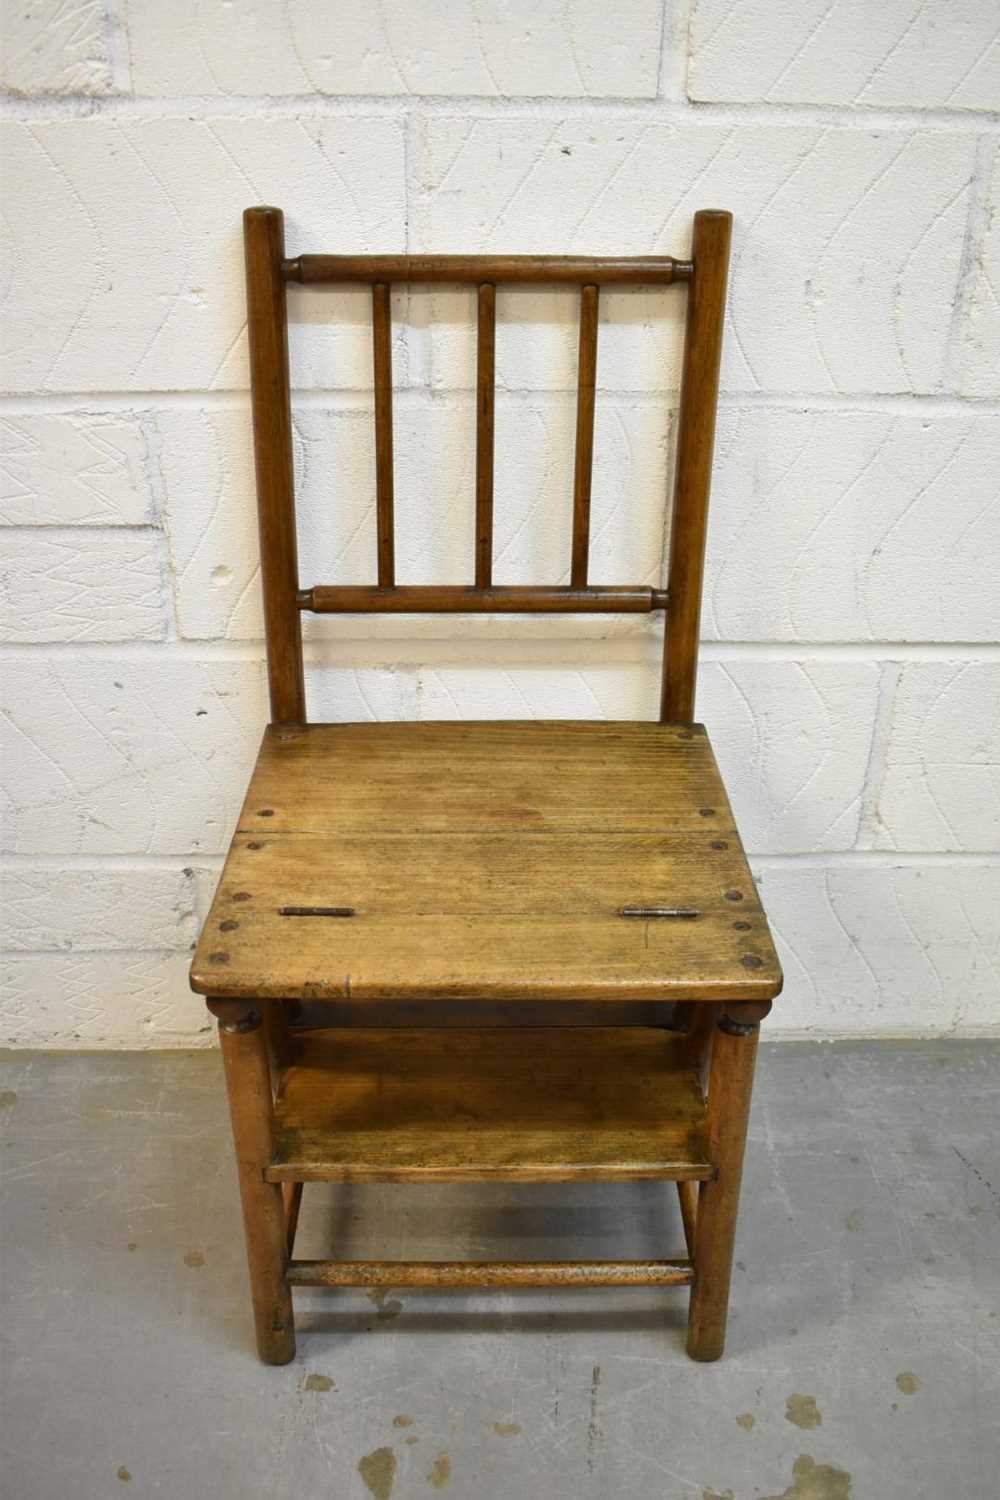 Victorian beech metamorphic library chair - Image 2 of 7